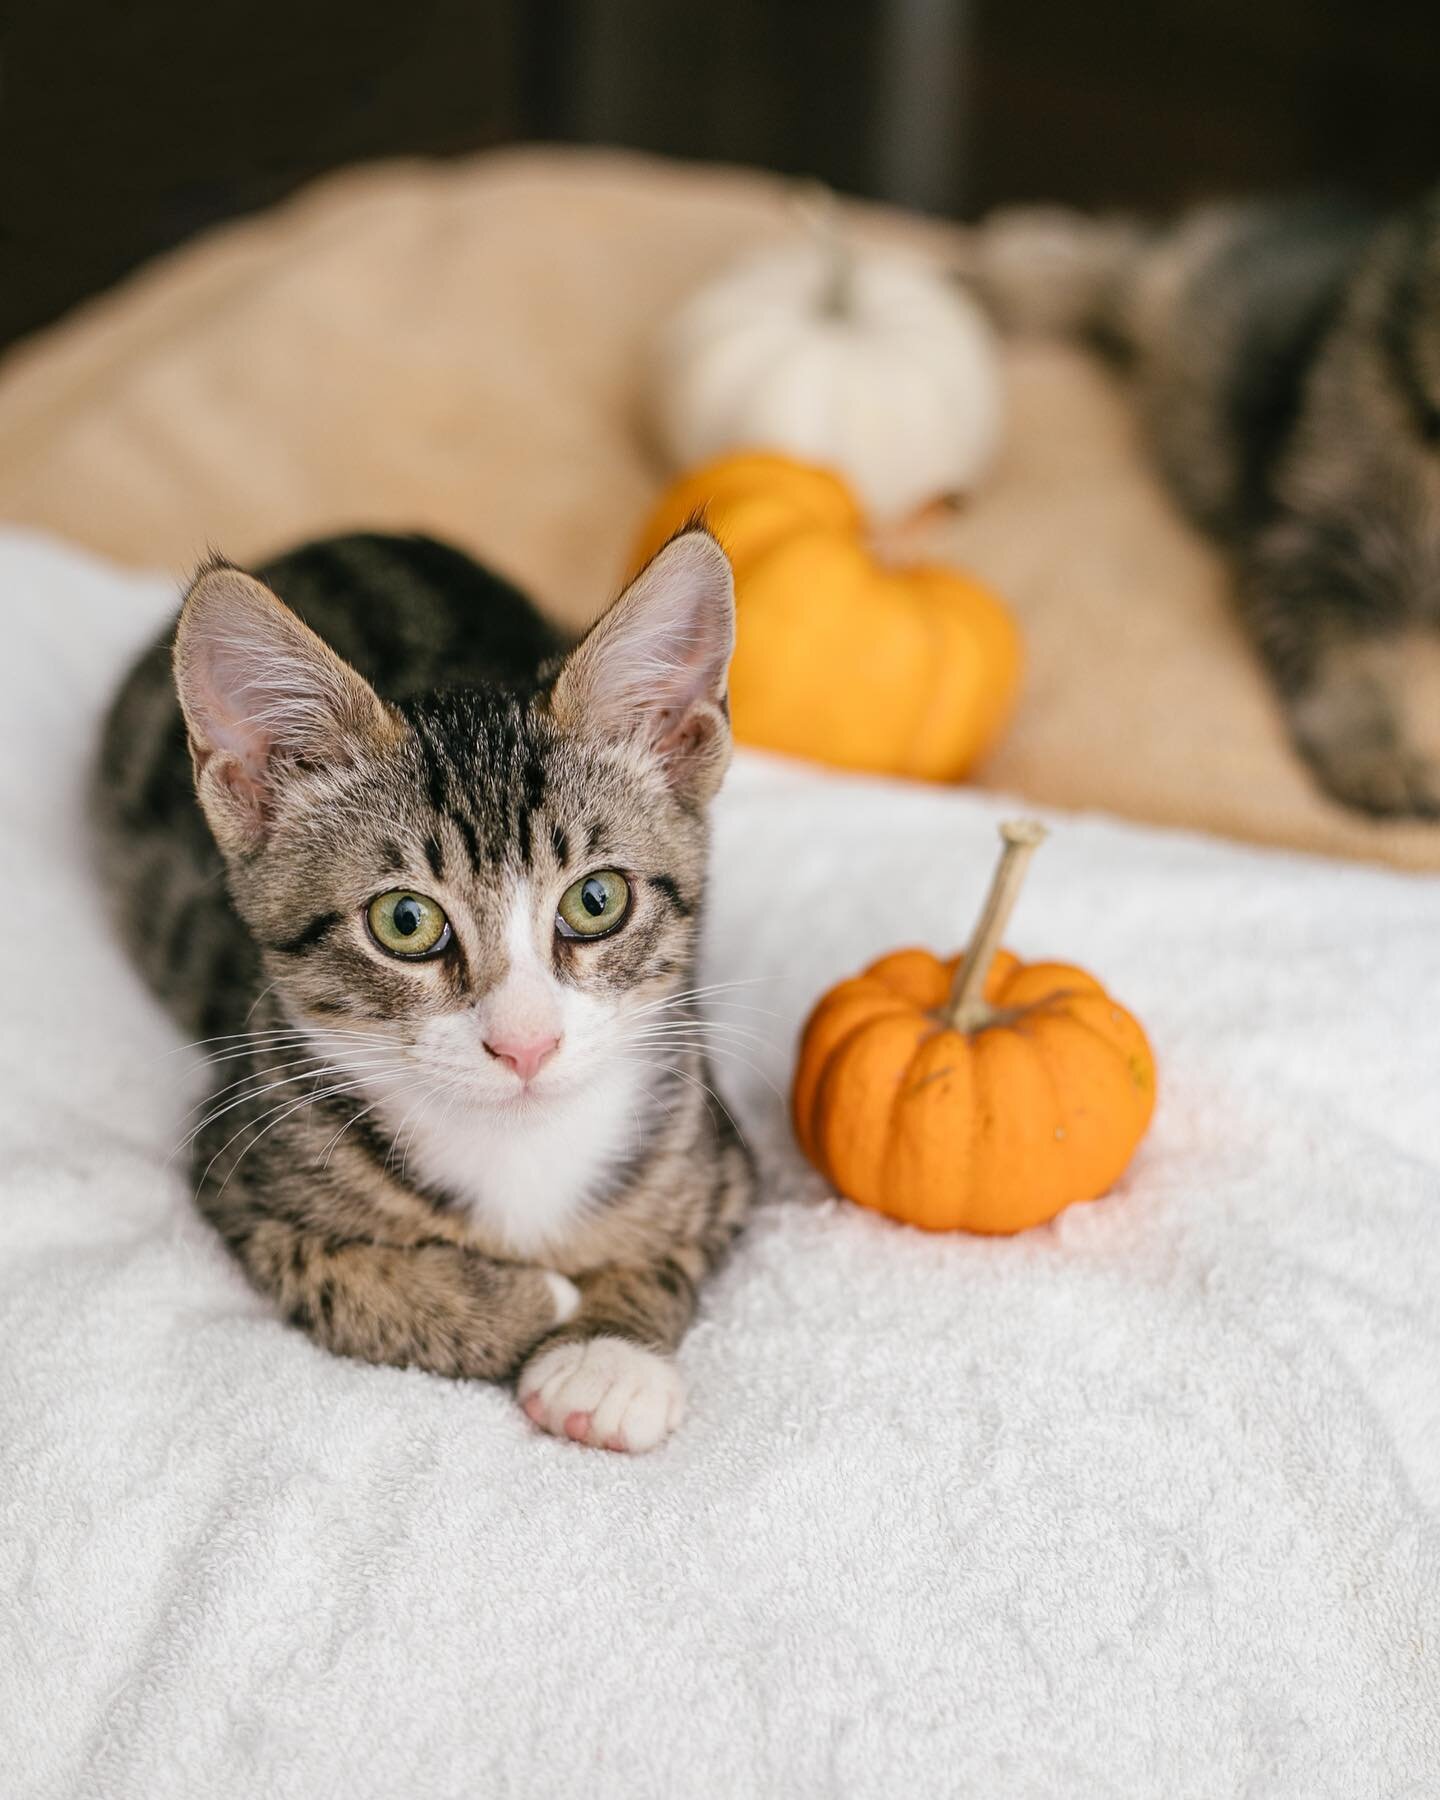 You&rsquo;ve heard of ladies who lunch, but have you heard of boys who brunch? Meet Bagel (short haired tabby with white belly and paws) and Lox (long haired tabby). These boys are a fun, playful, silly duo that came from separate litters. This is ou